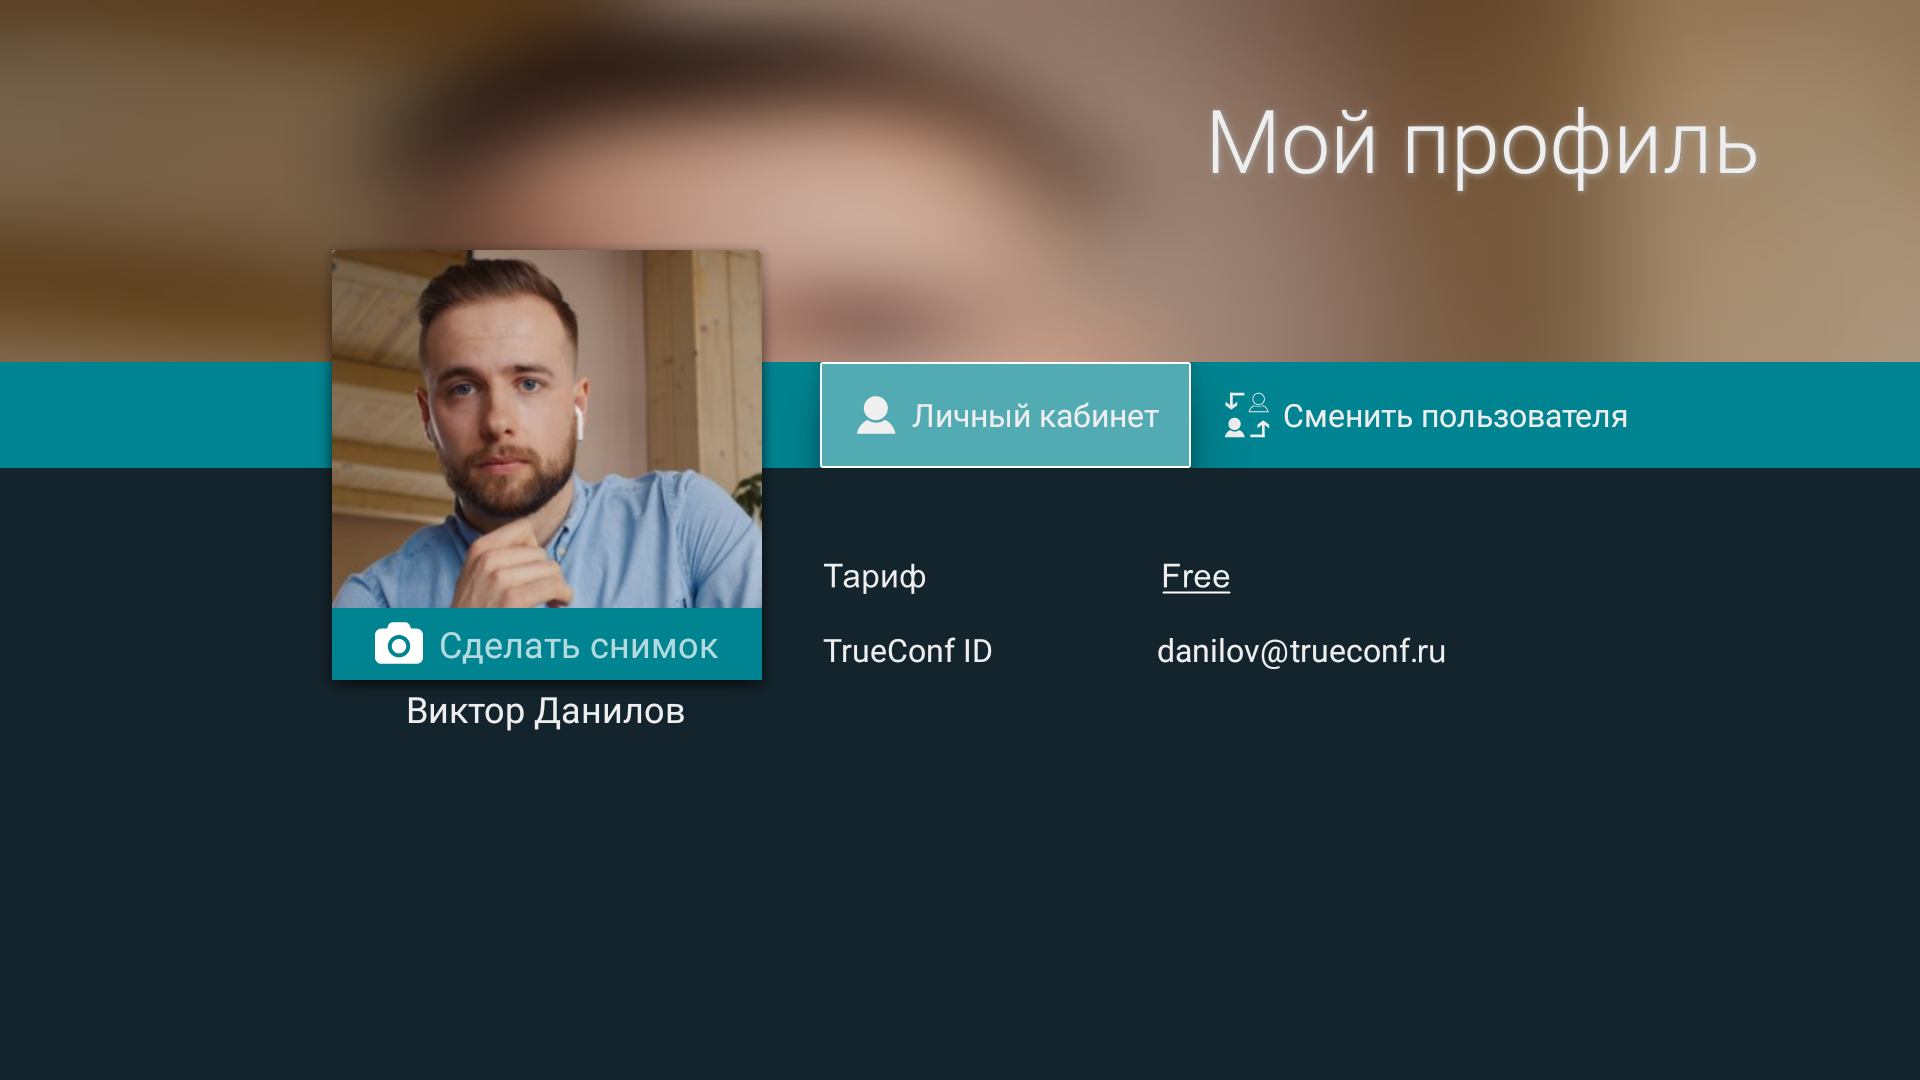 /client-android-tv/media/view_profile_tco/ru.png